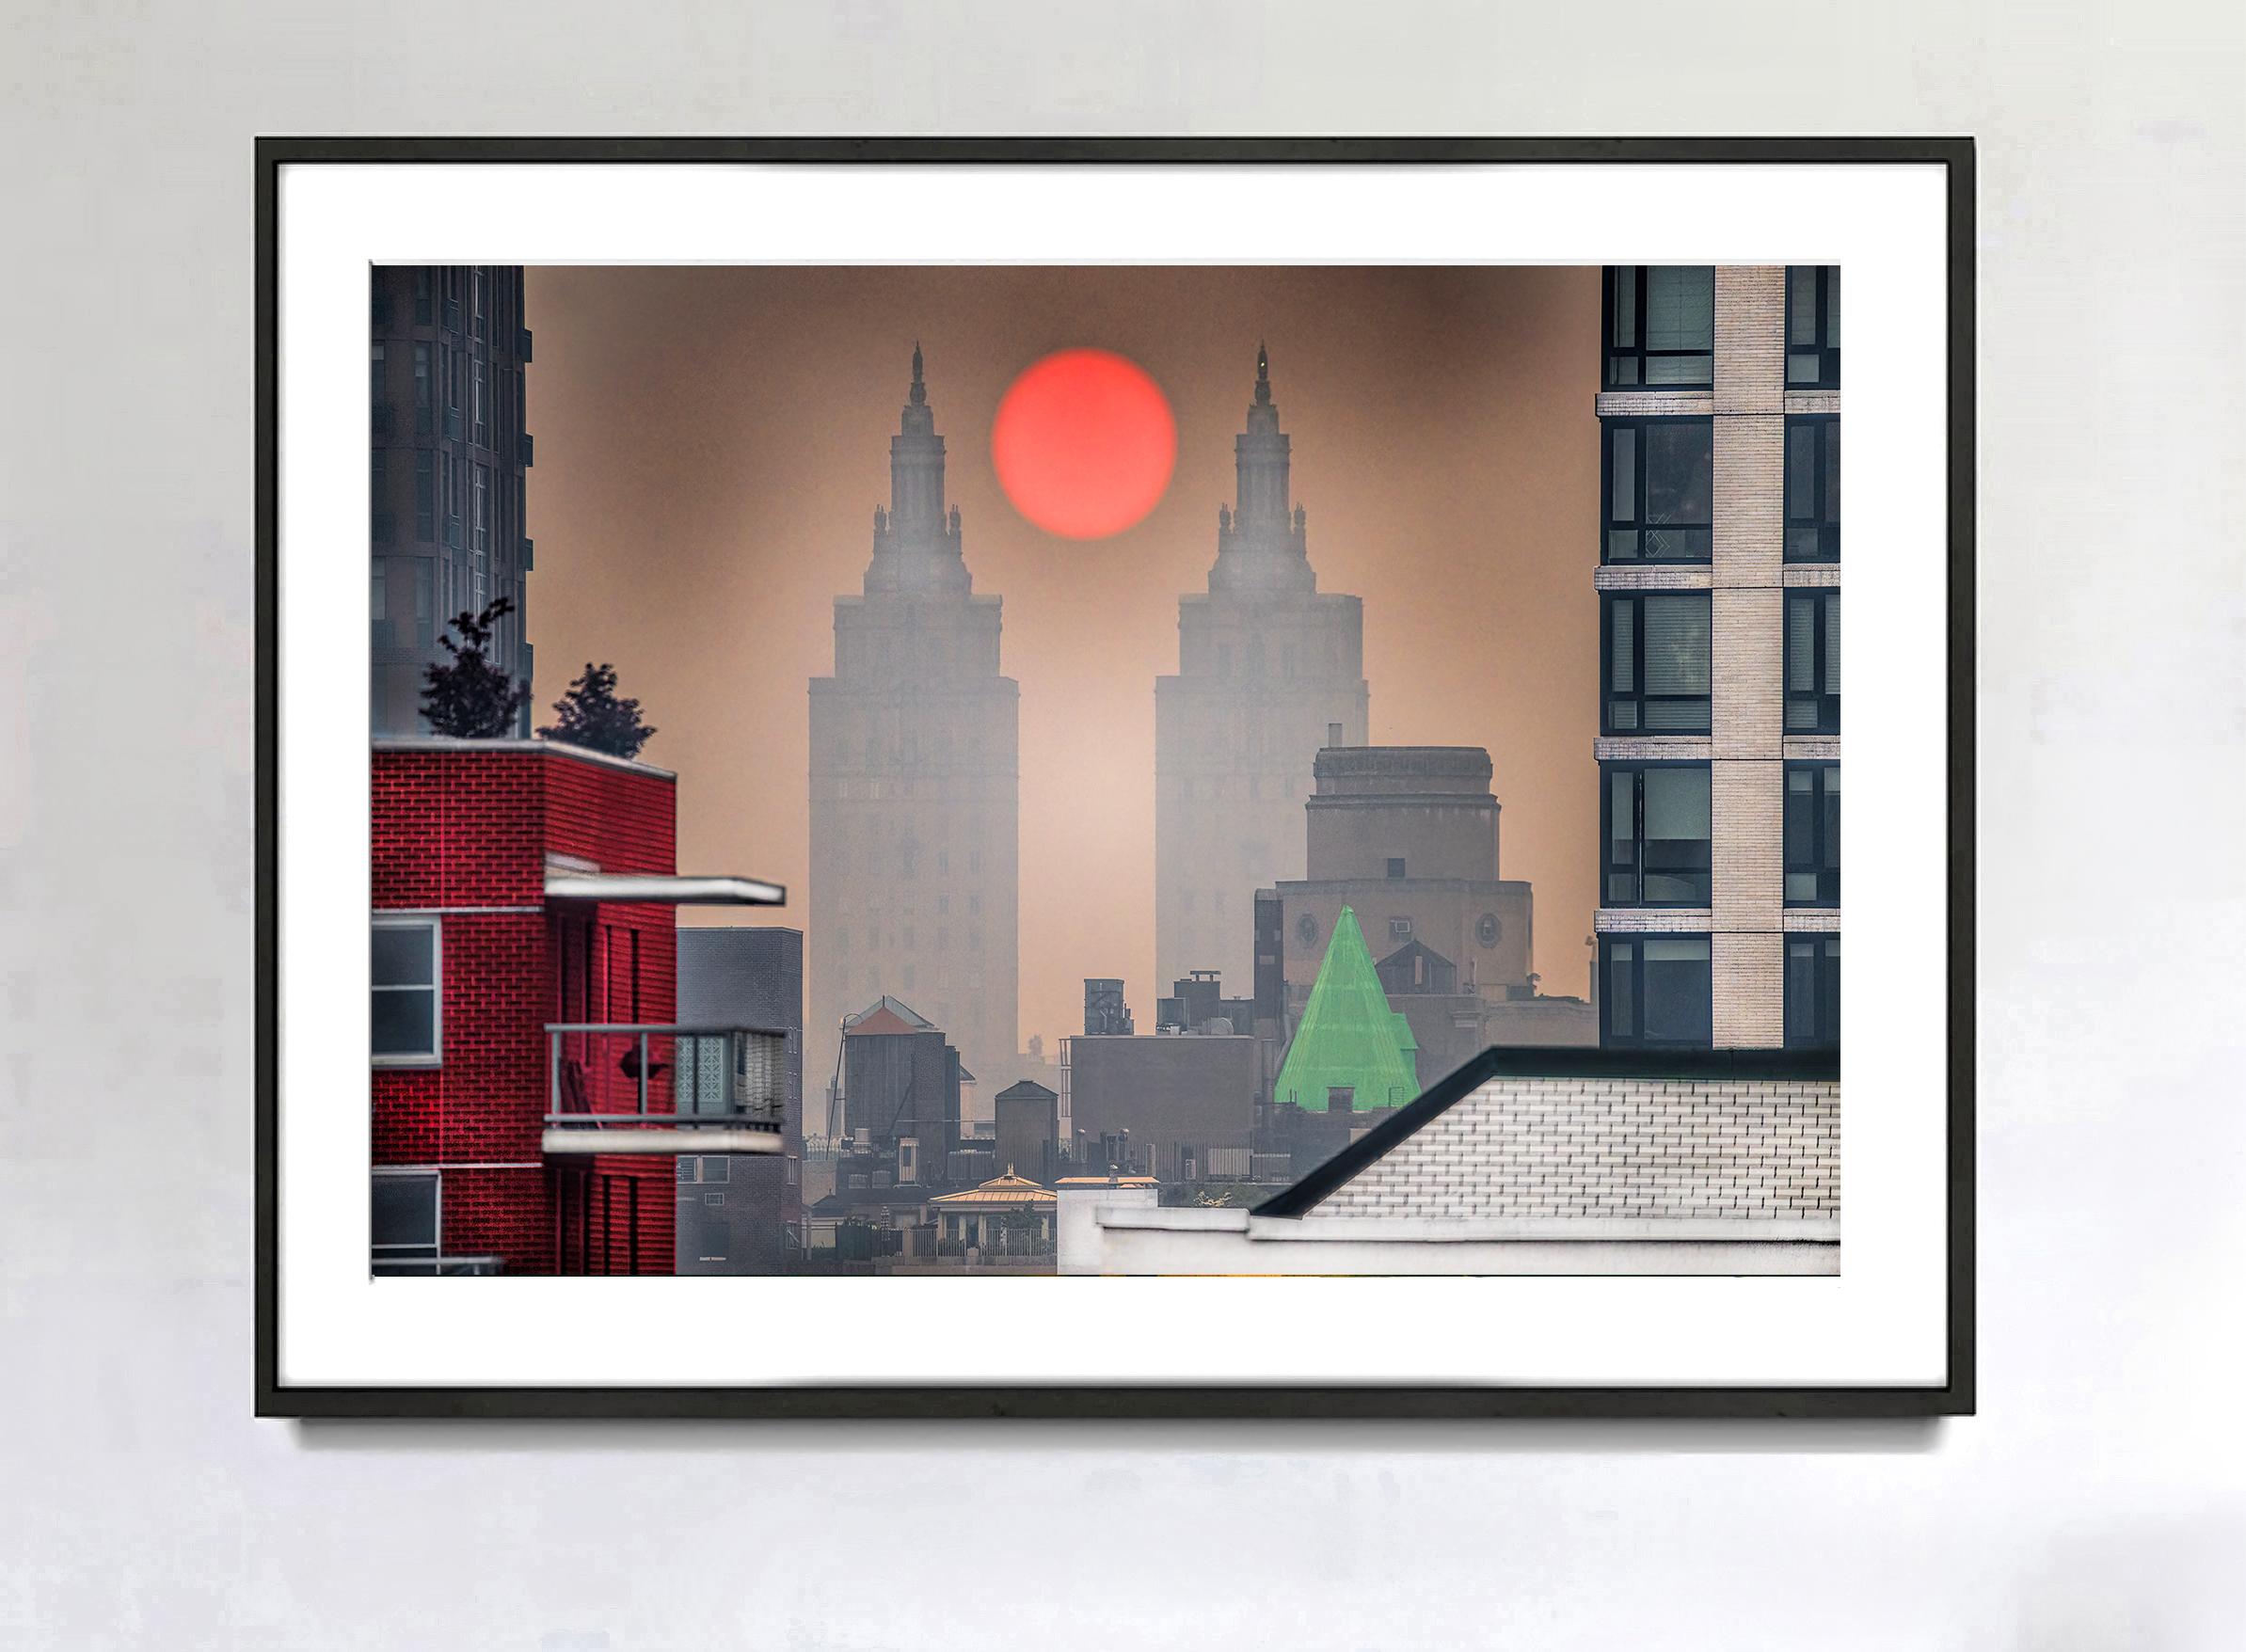 New York City Hazy Day, Central Park West Towers Cradle Orange Red Sun - Photograph by Mitchell Funk